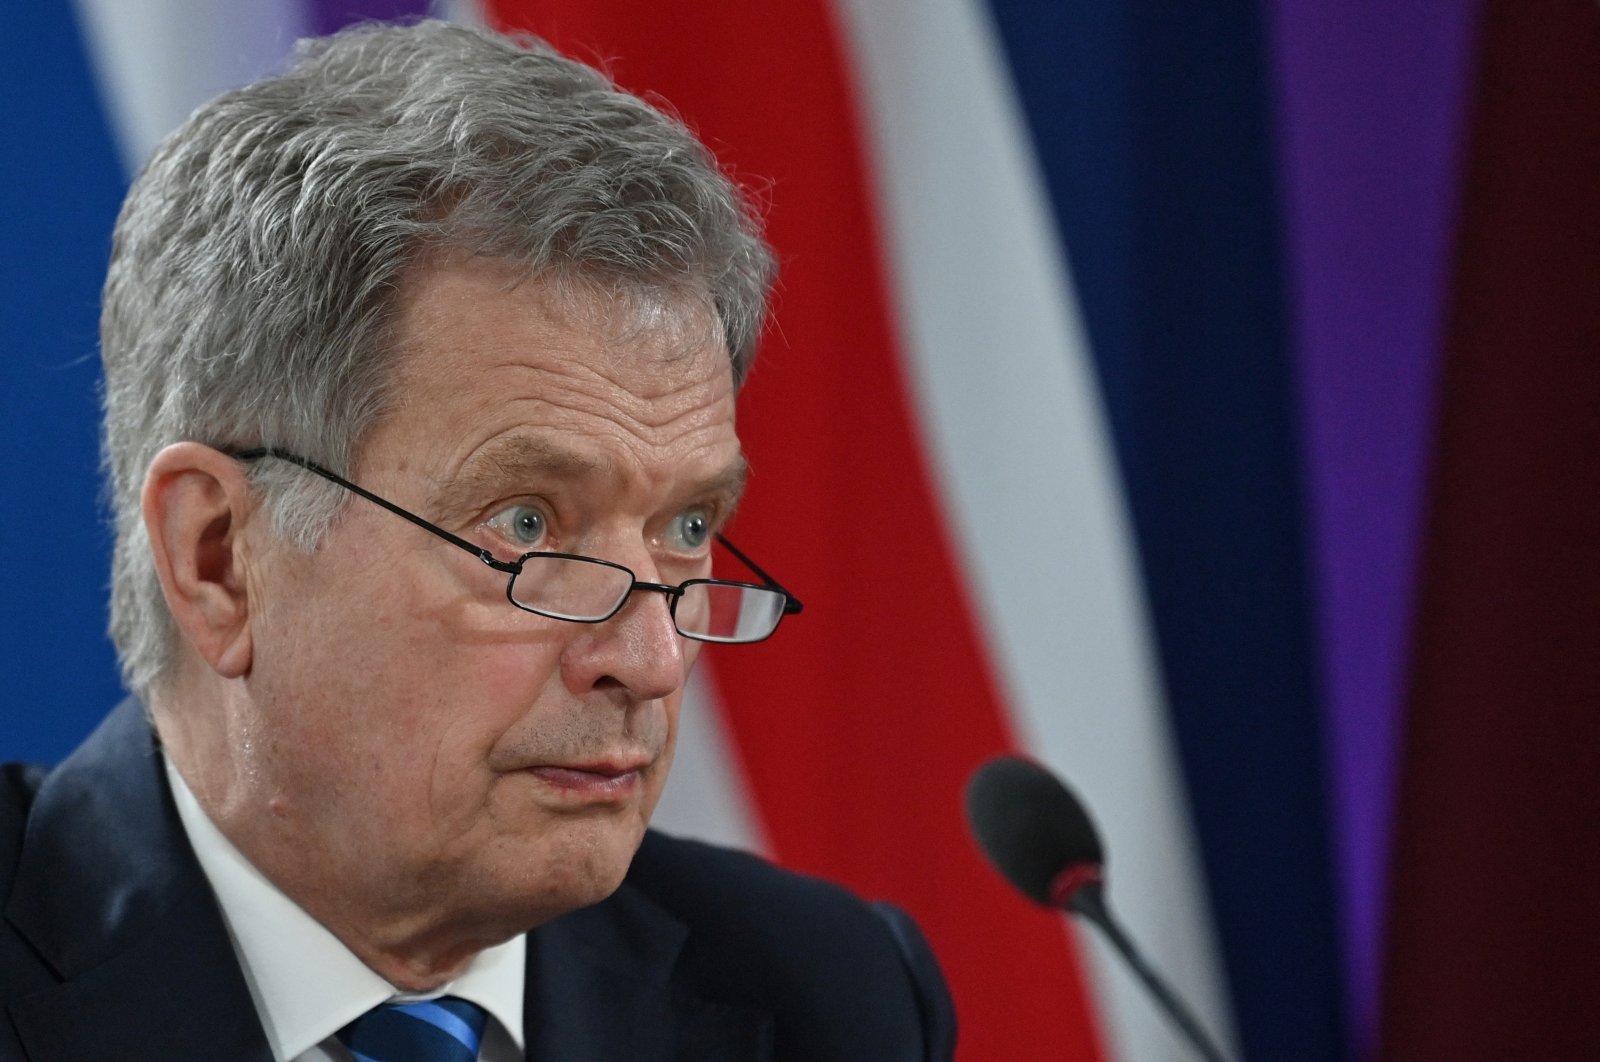 Finland&#039;s President Sauli Niinisto attends a meeting of the leaders of the Joint Expeditionary Force (JEF), at Lancaster House, in London, Britain, March 15, 2022. (Reuters Photo)